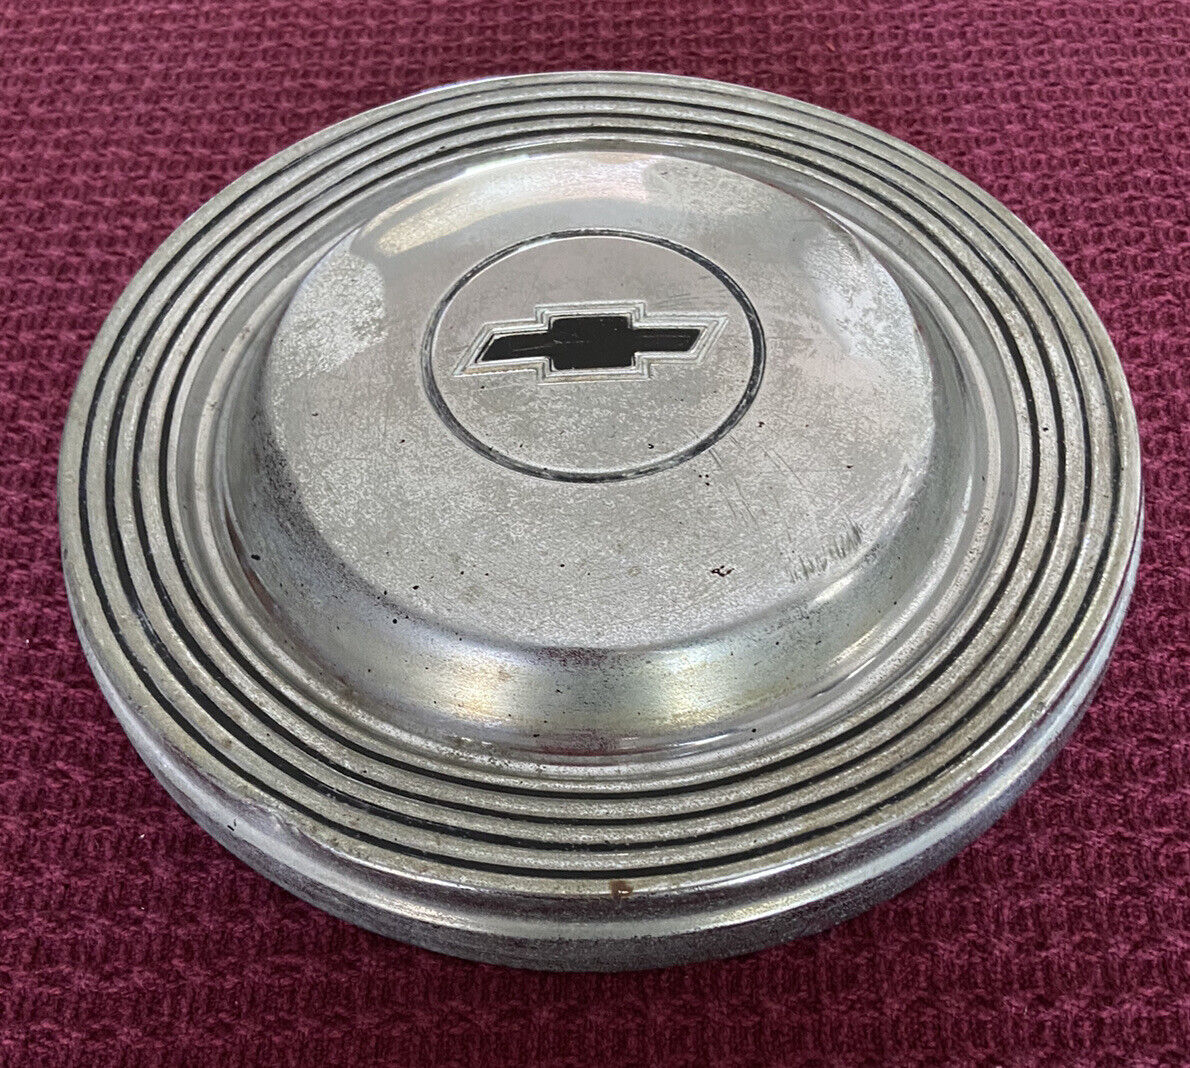 Vintage Chevrolet Chevy Dog Dish Hubcap 1960s-70s.